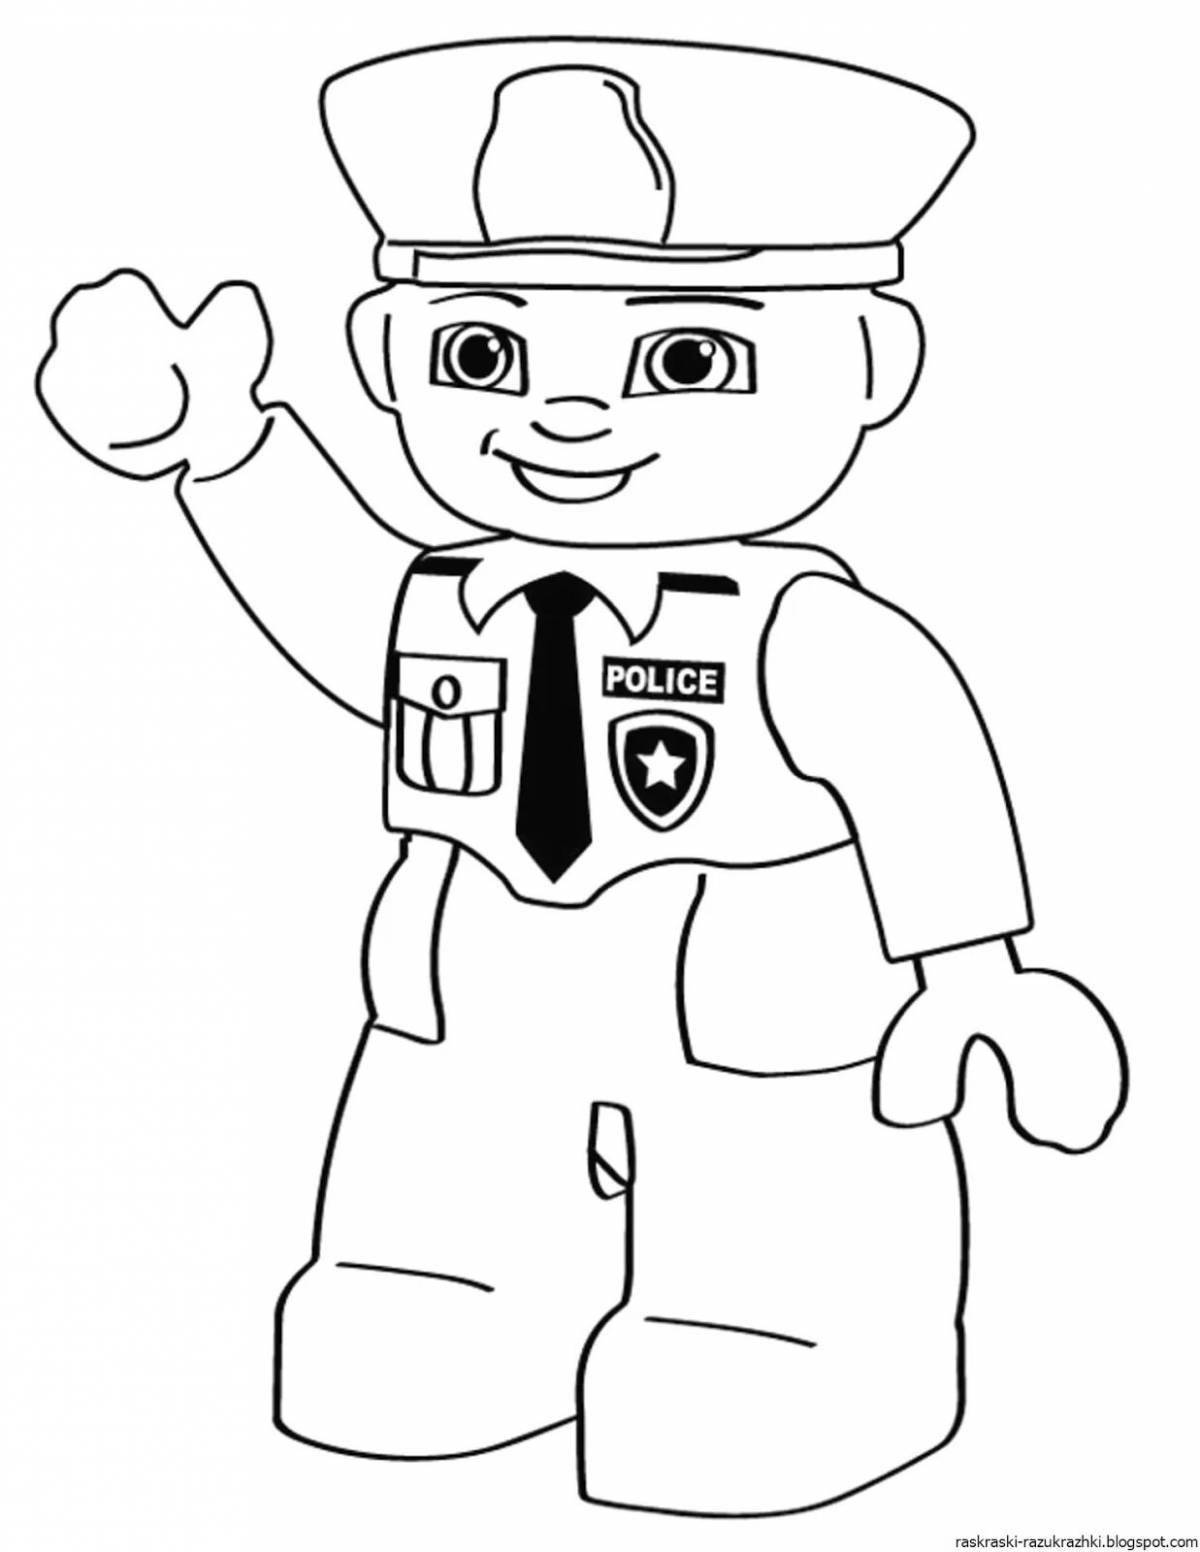 Fancy police russian coloring book